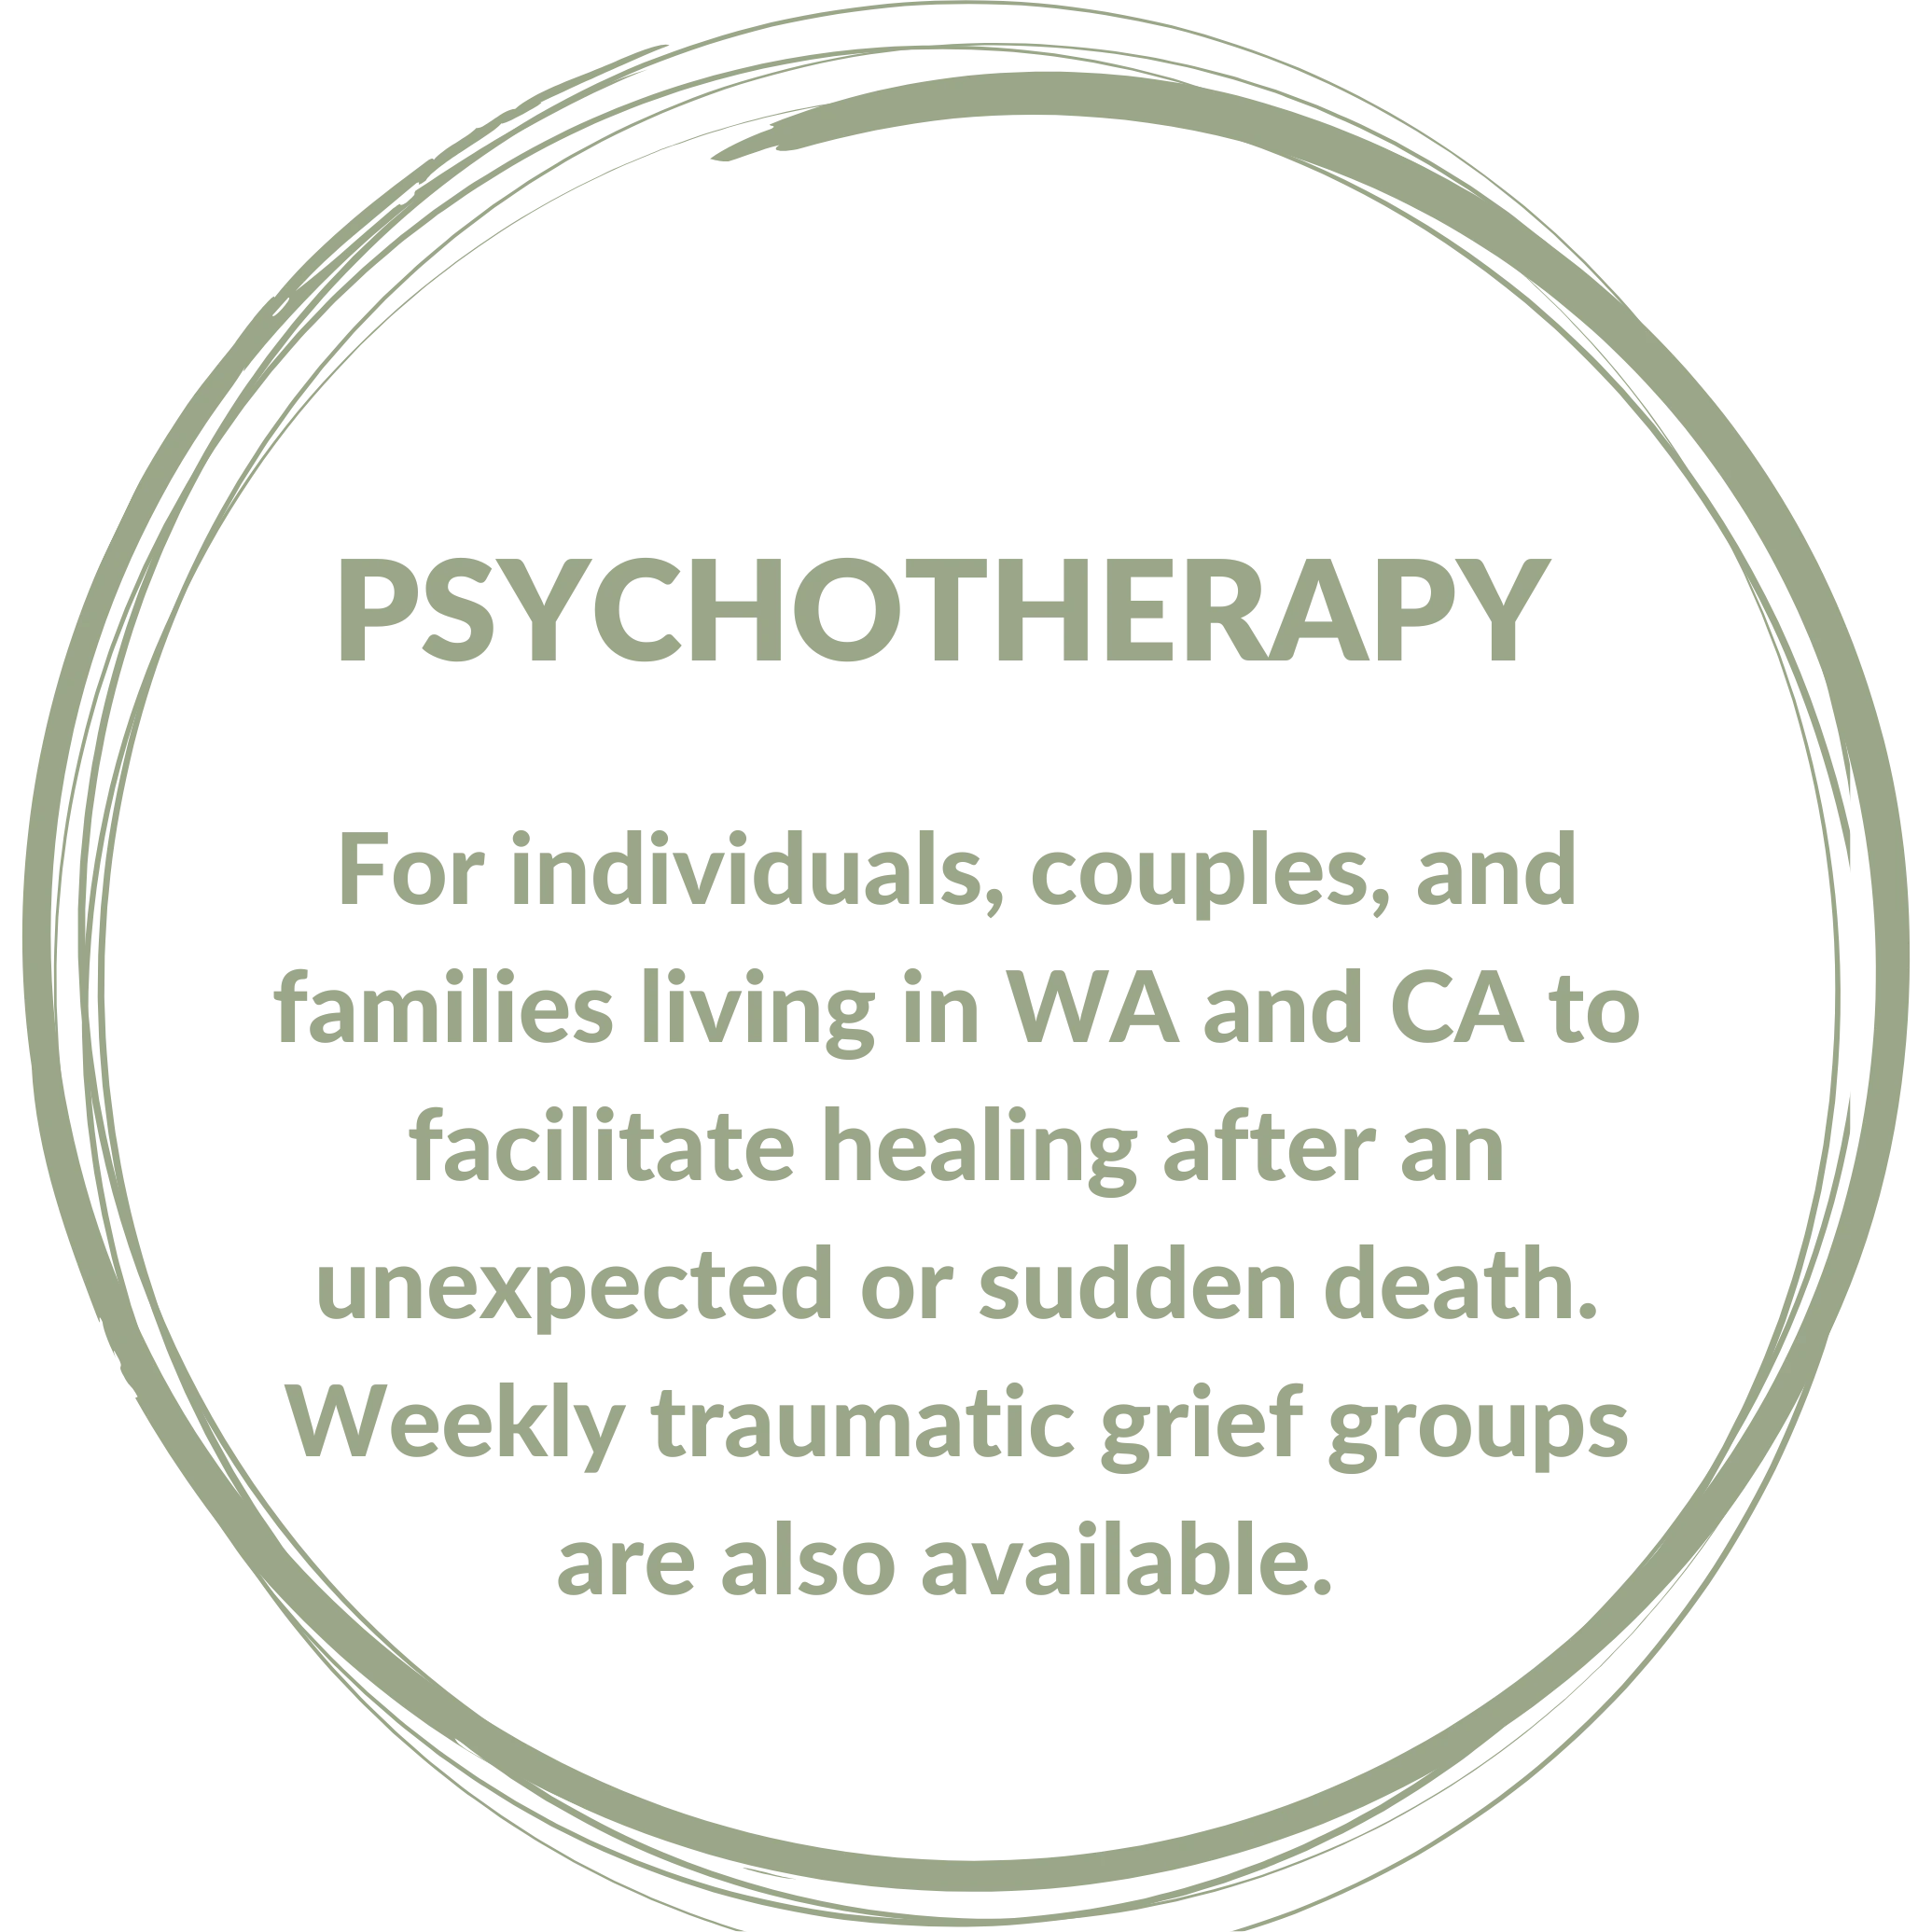 PSYCHOTHERAPY: For individuals, couples, and families living in WA and CA to facilitate healing after an unexpected or sudden death. Weekly traumatic grief groups are also available.